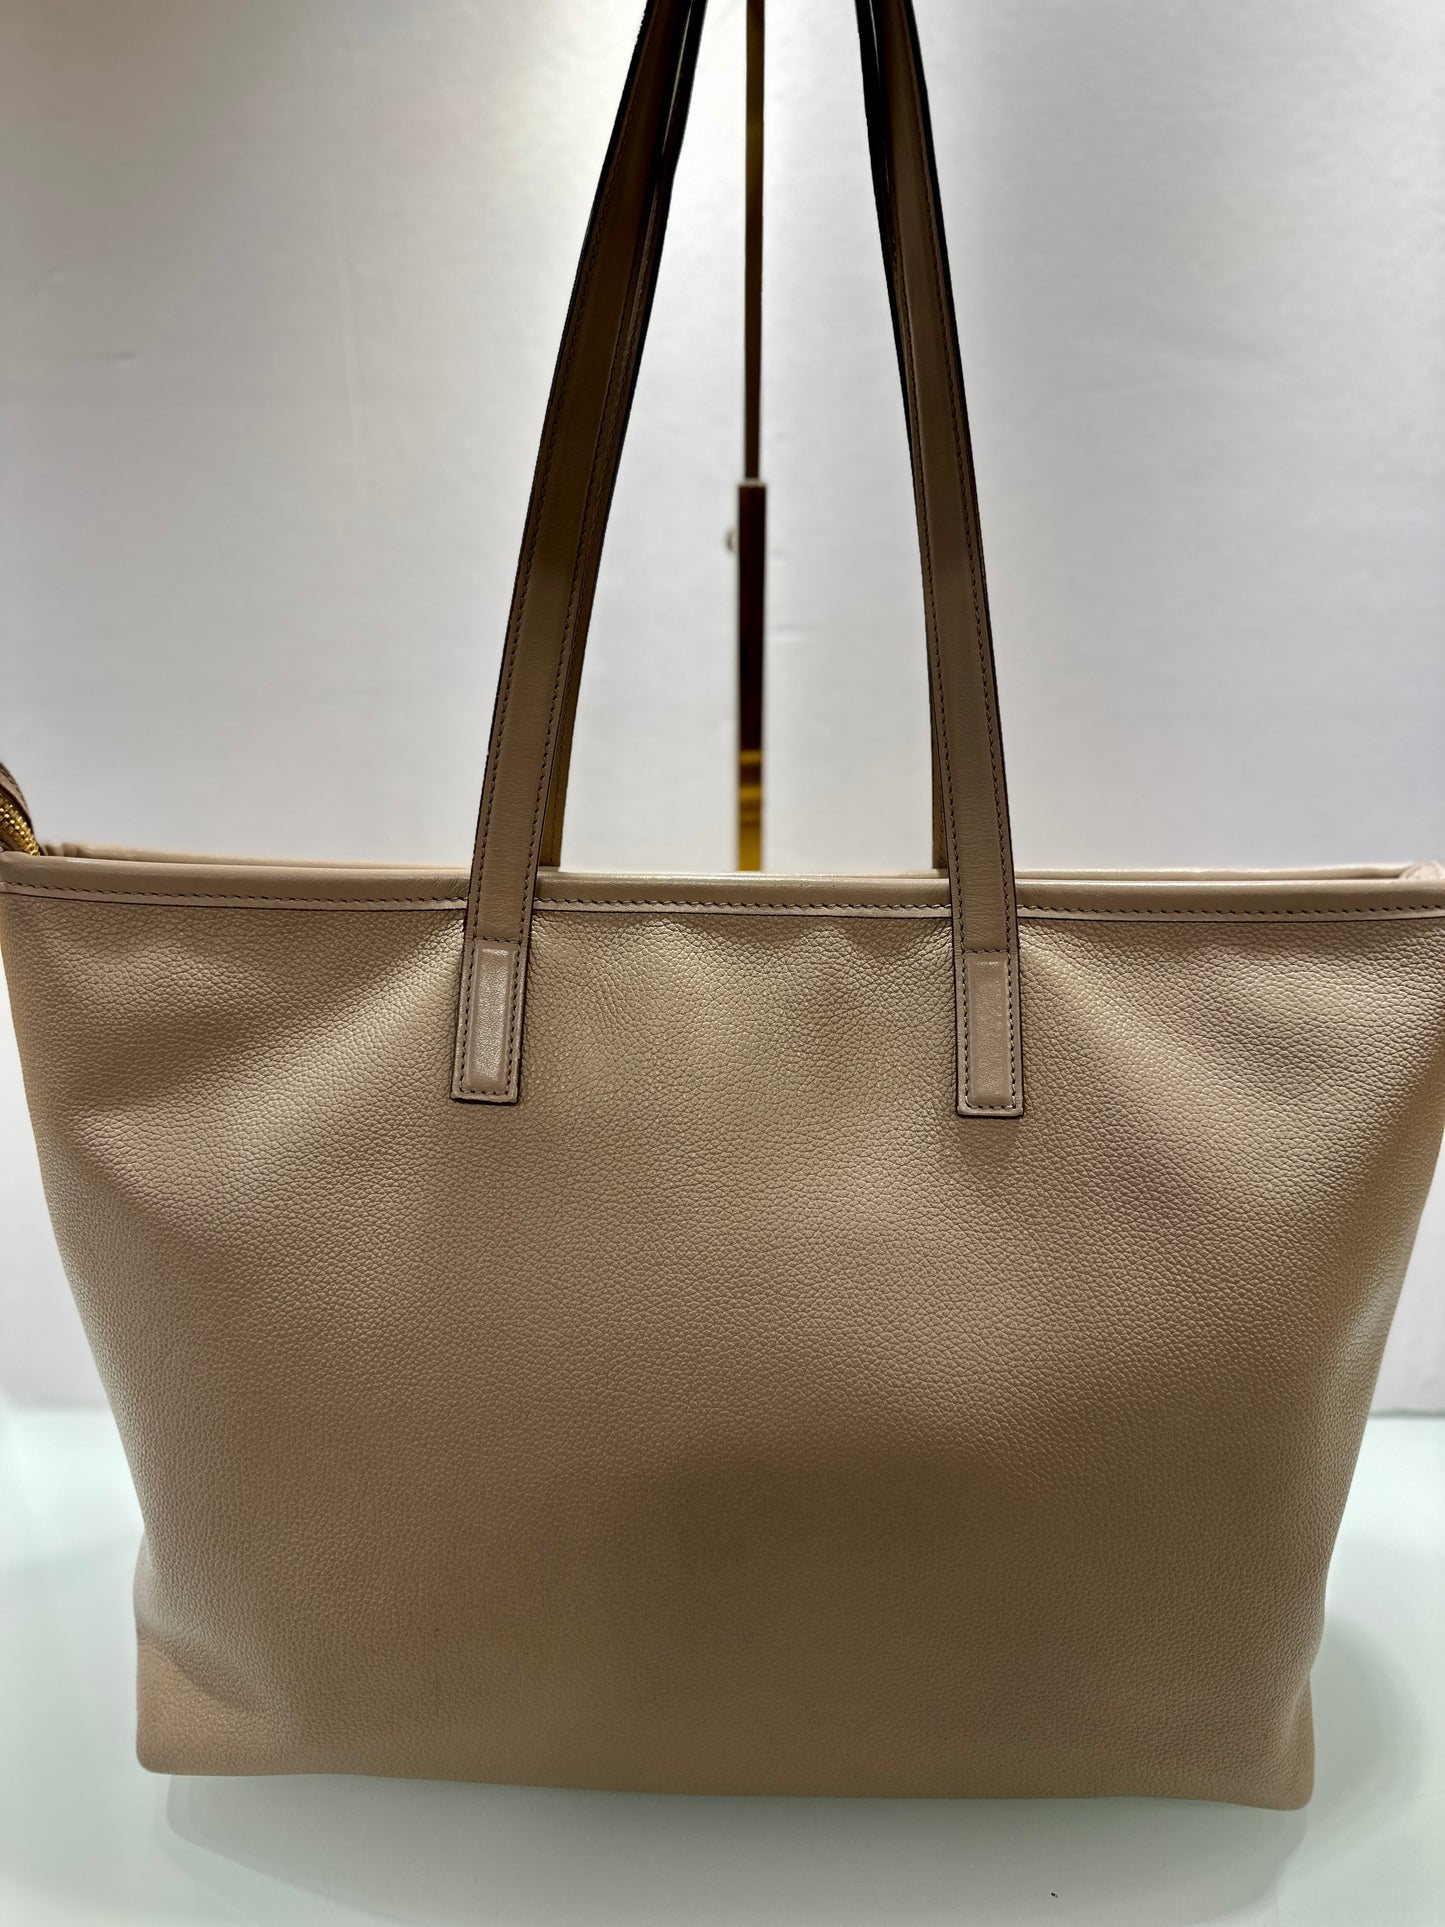 TOM FORD East West Leather Tote Bag